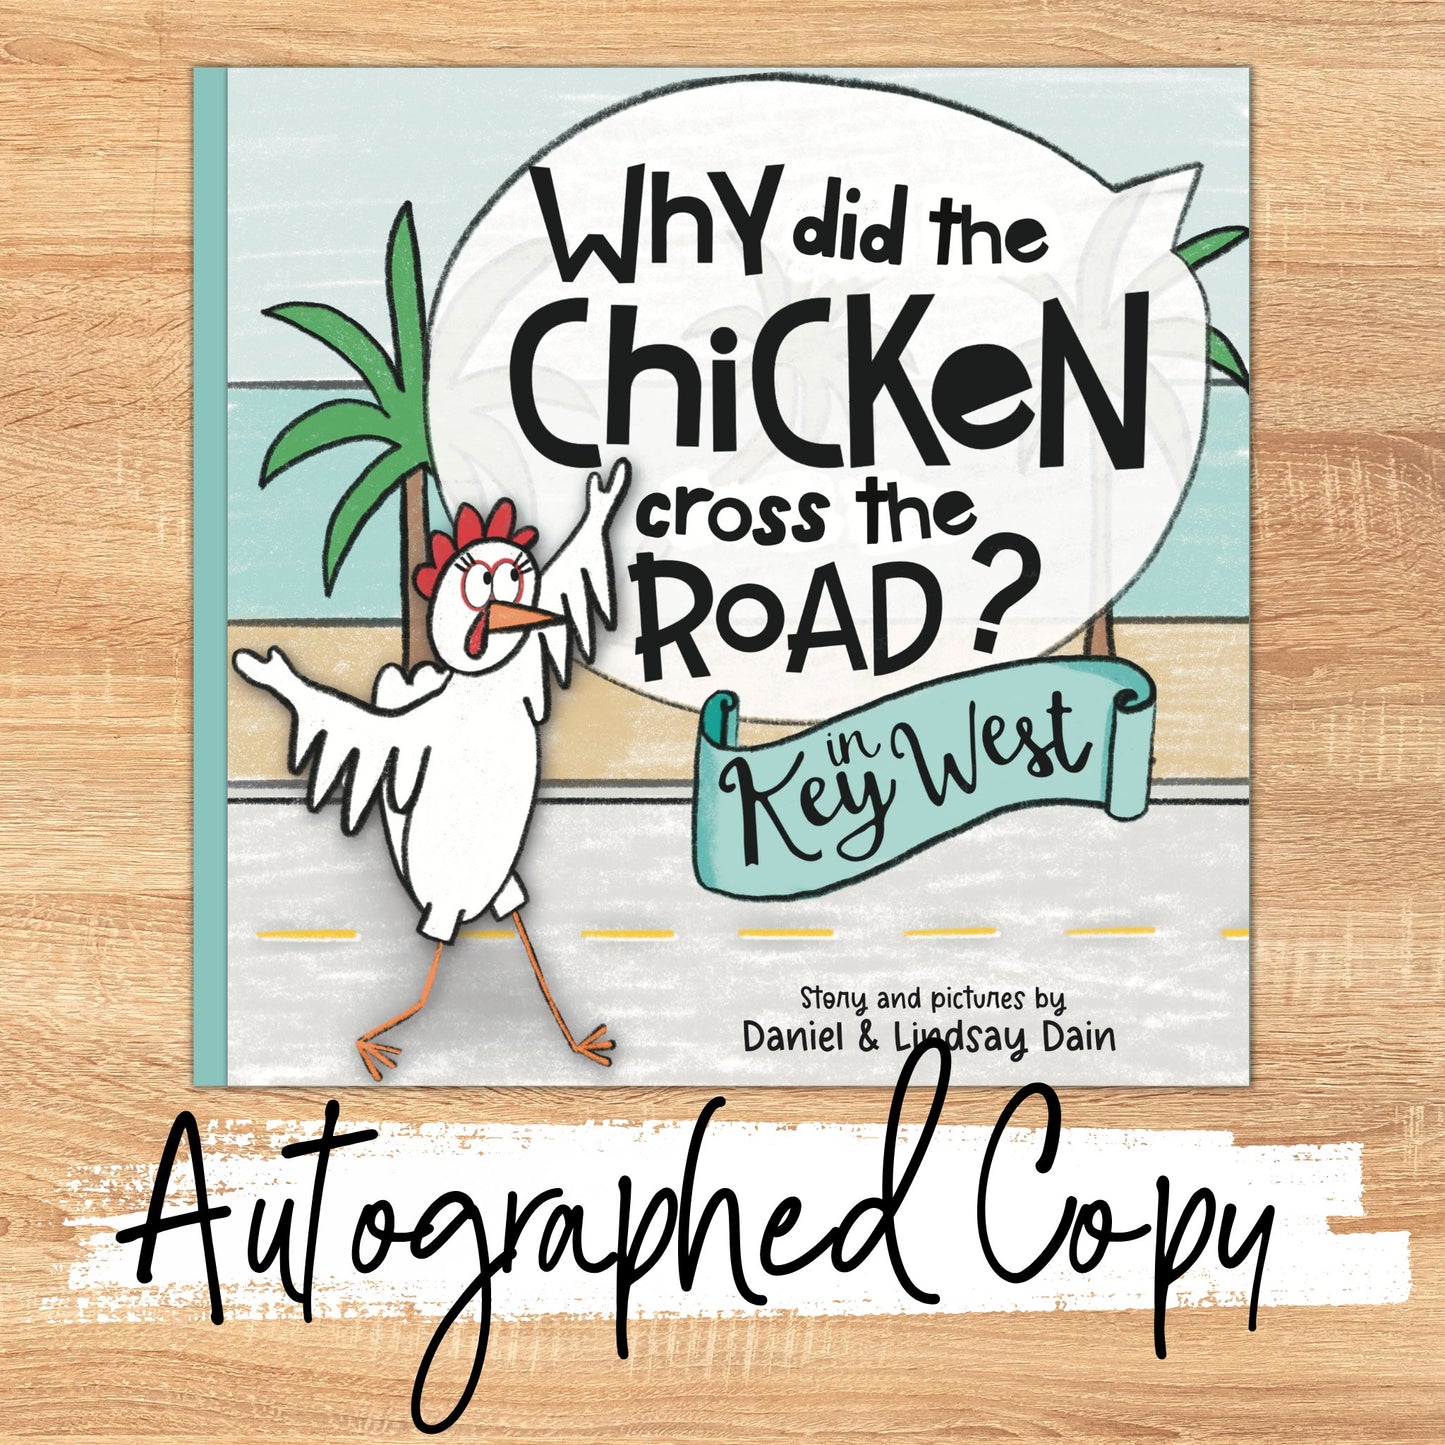 Autographed copy cover example of the children’s picture book called “Why Did the Chicken Cross the Road in Key West?” that was self-published through Amazon’s Kindle Direct Publishing.